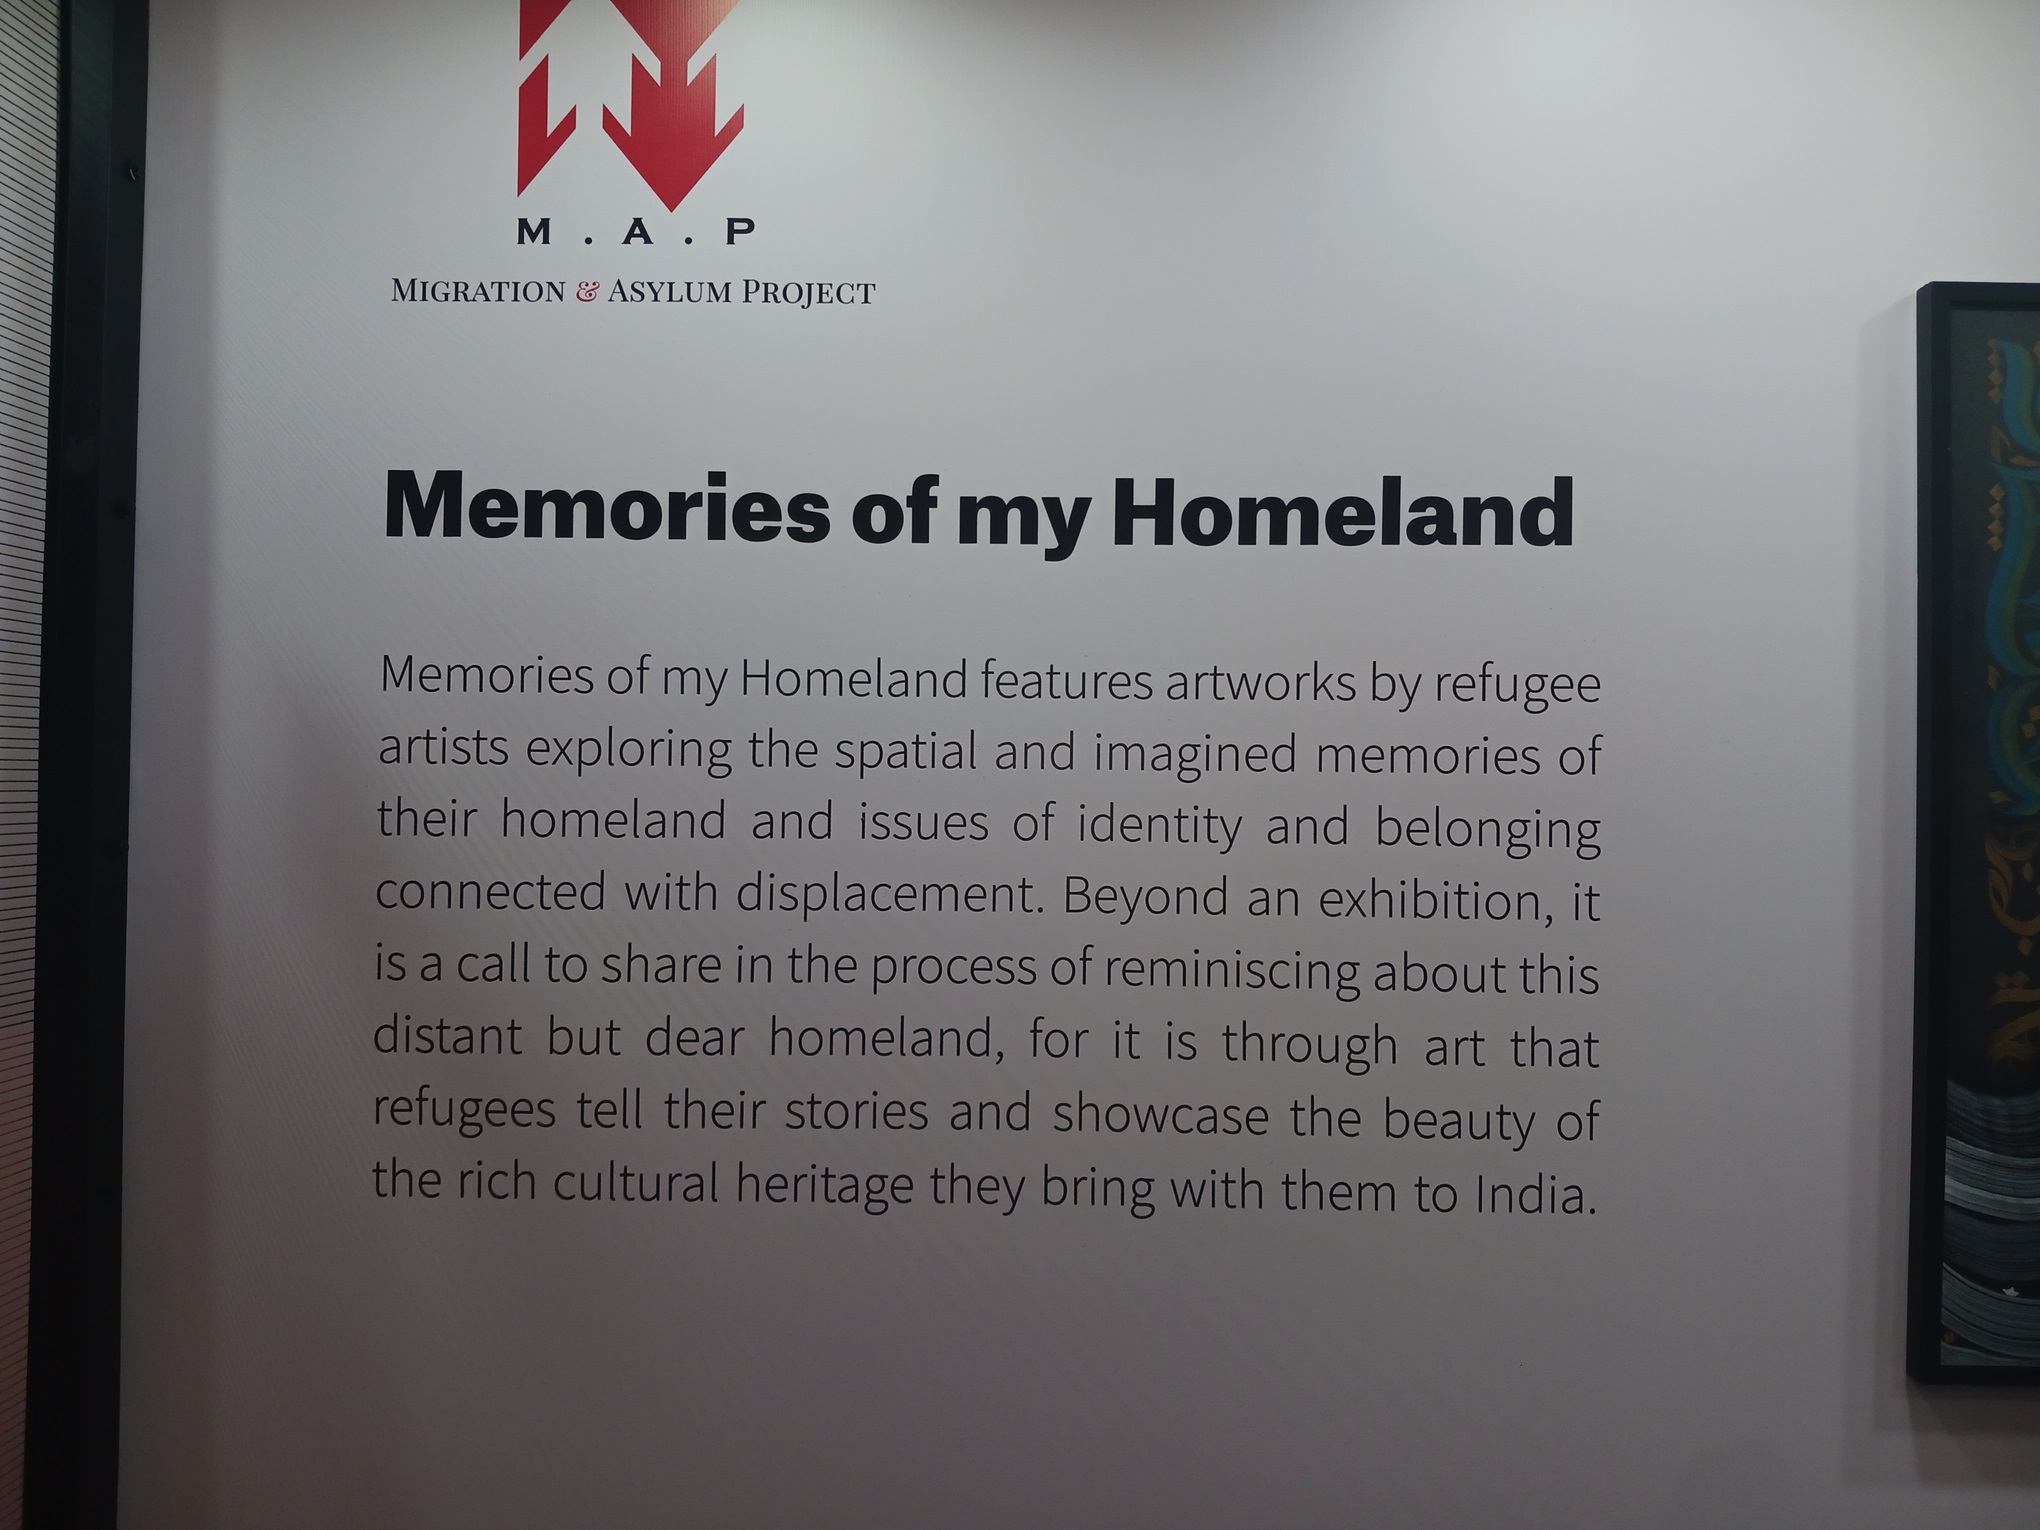 Text from the Migration and Asylum Project, 'Memories of my Homeland